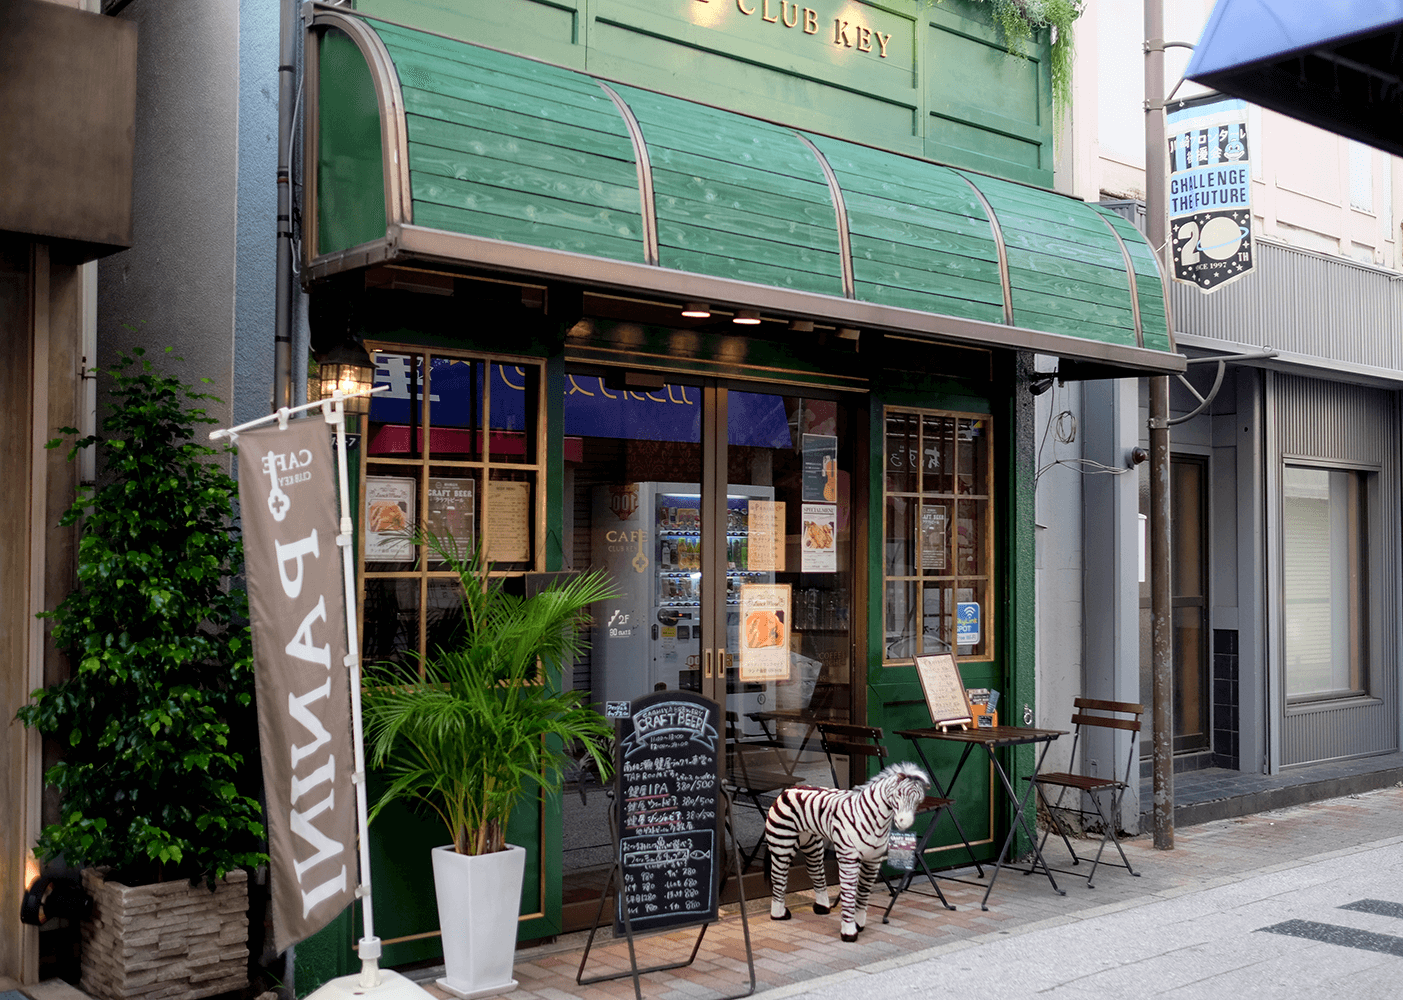 Cafe CLUB KEY 鹿島田店（カフェ クラブ キー カシマダテン）